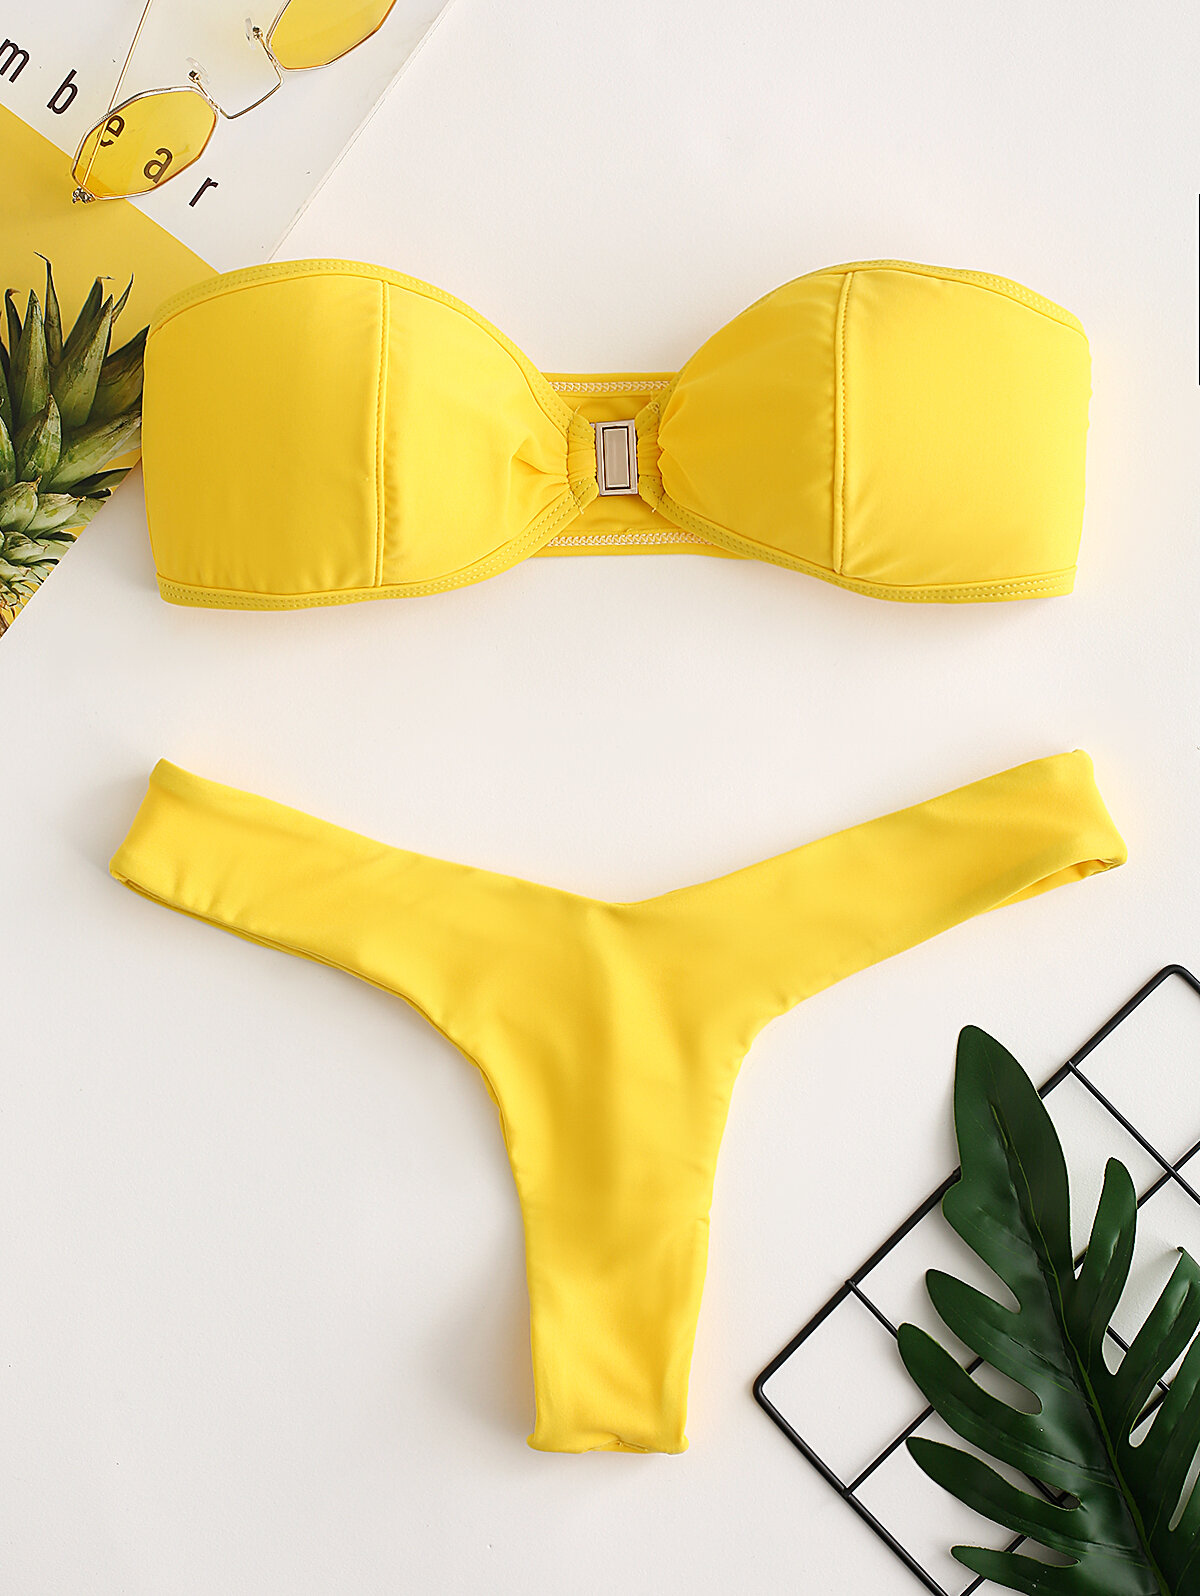 

High Cut Thong Bikinis Push Up Bandeau Solid Color Backless Sexy Women Swimsuits By Newchic, Yellow